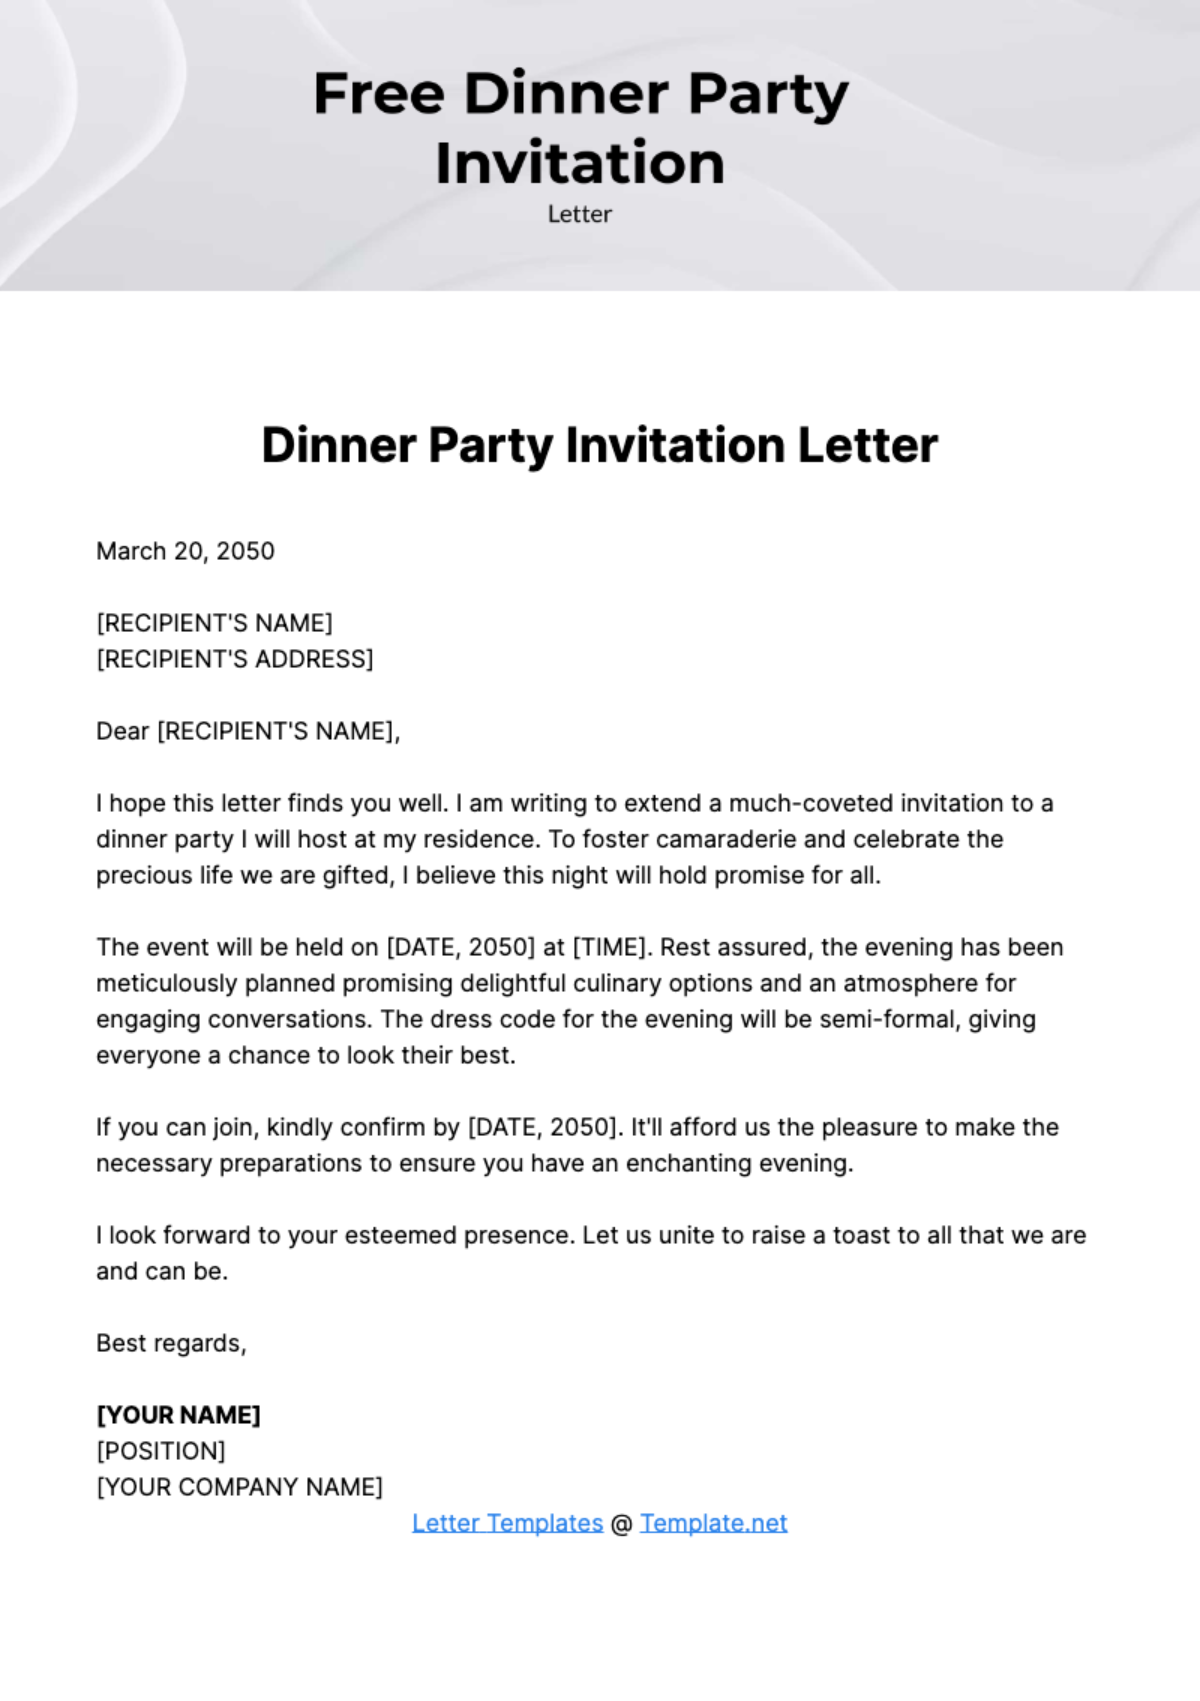 Free Dinner Party Invitation Letter Template